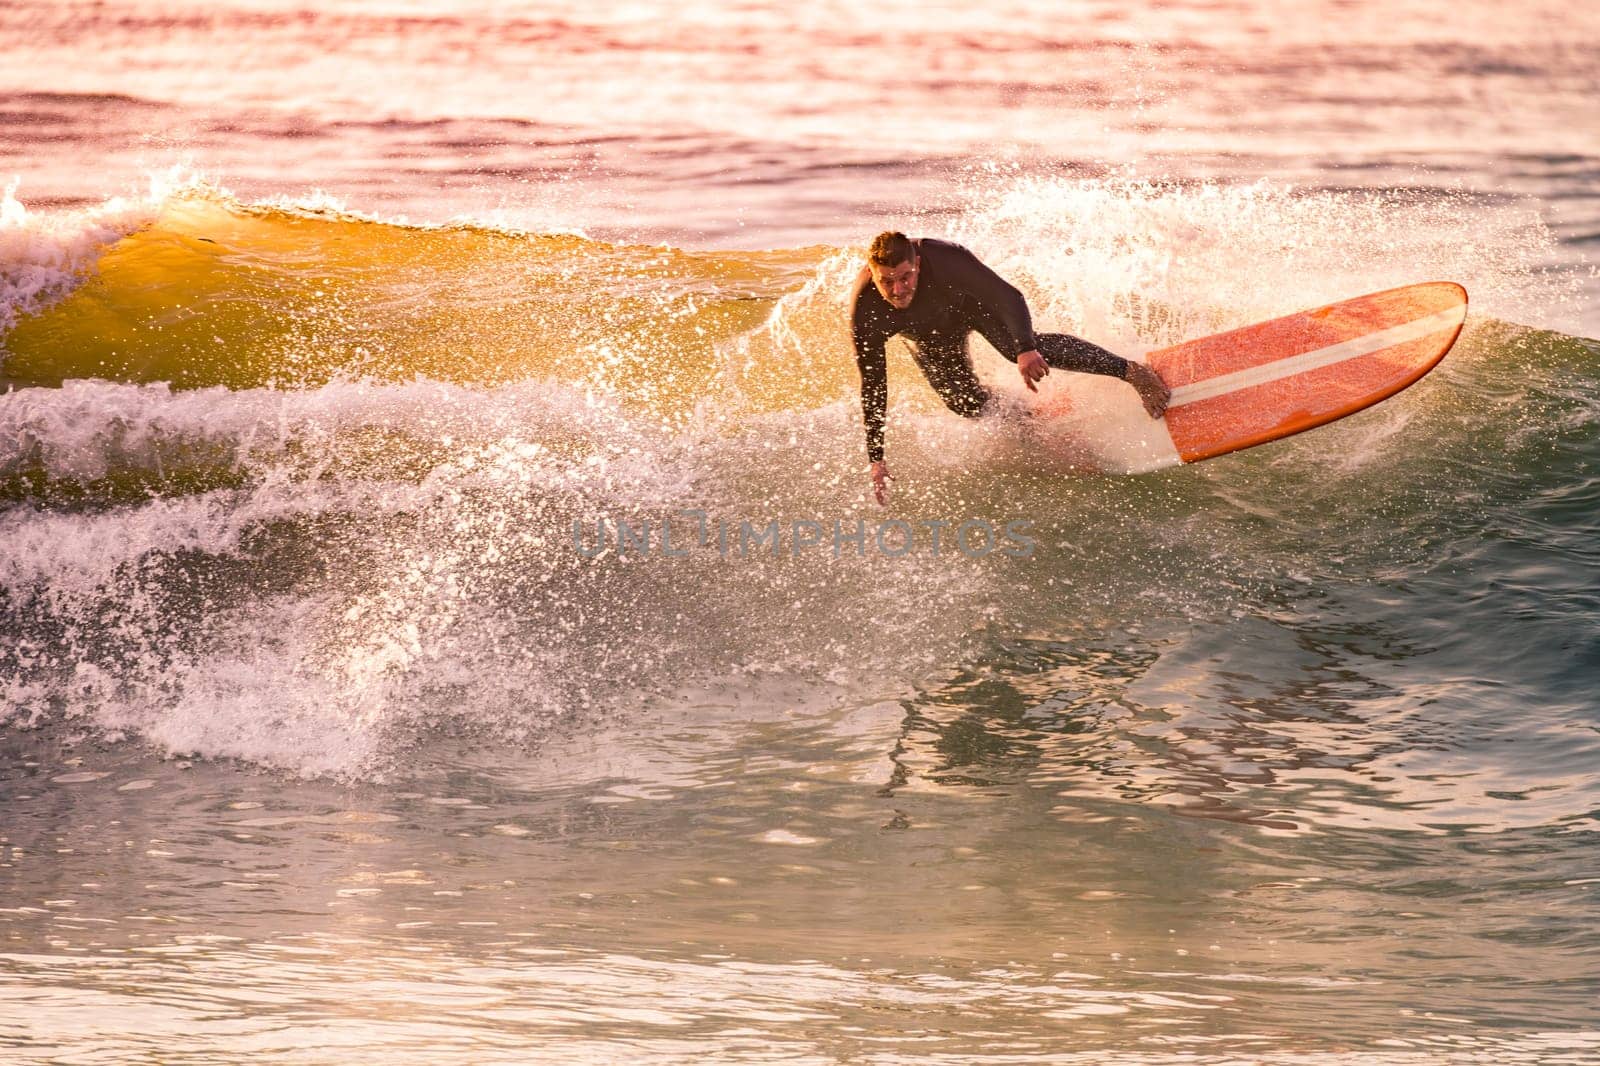 Young Man Riding Wave at Sunset by homydesign